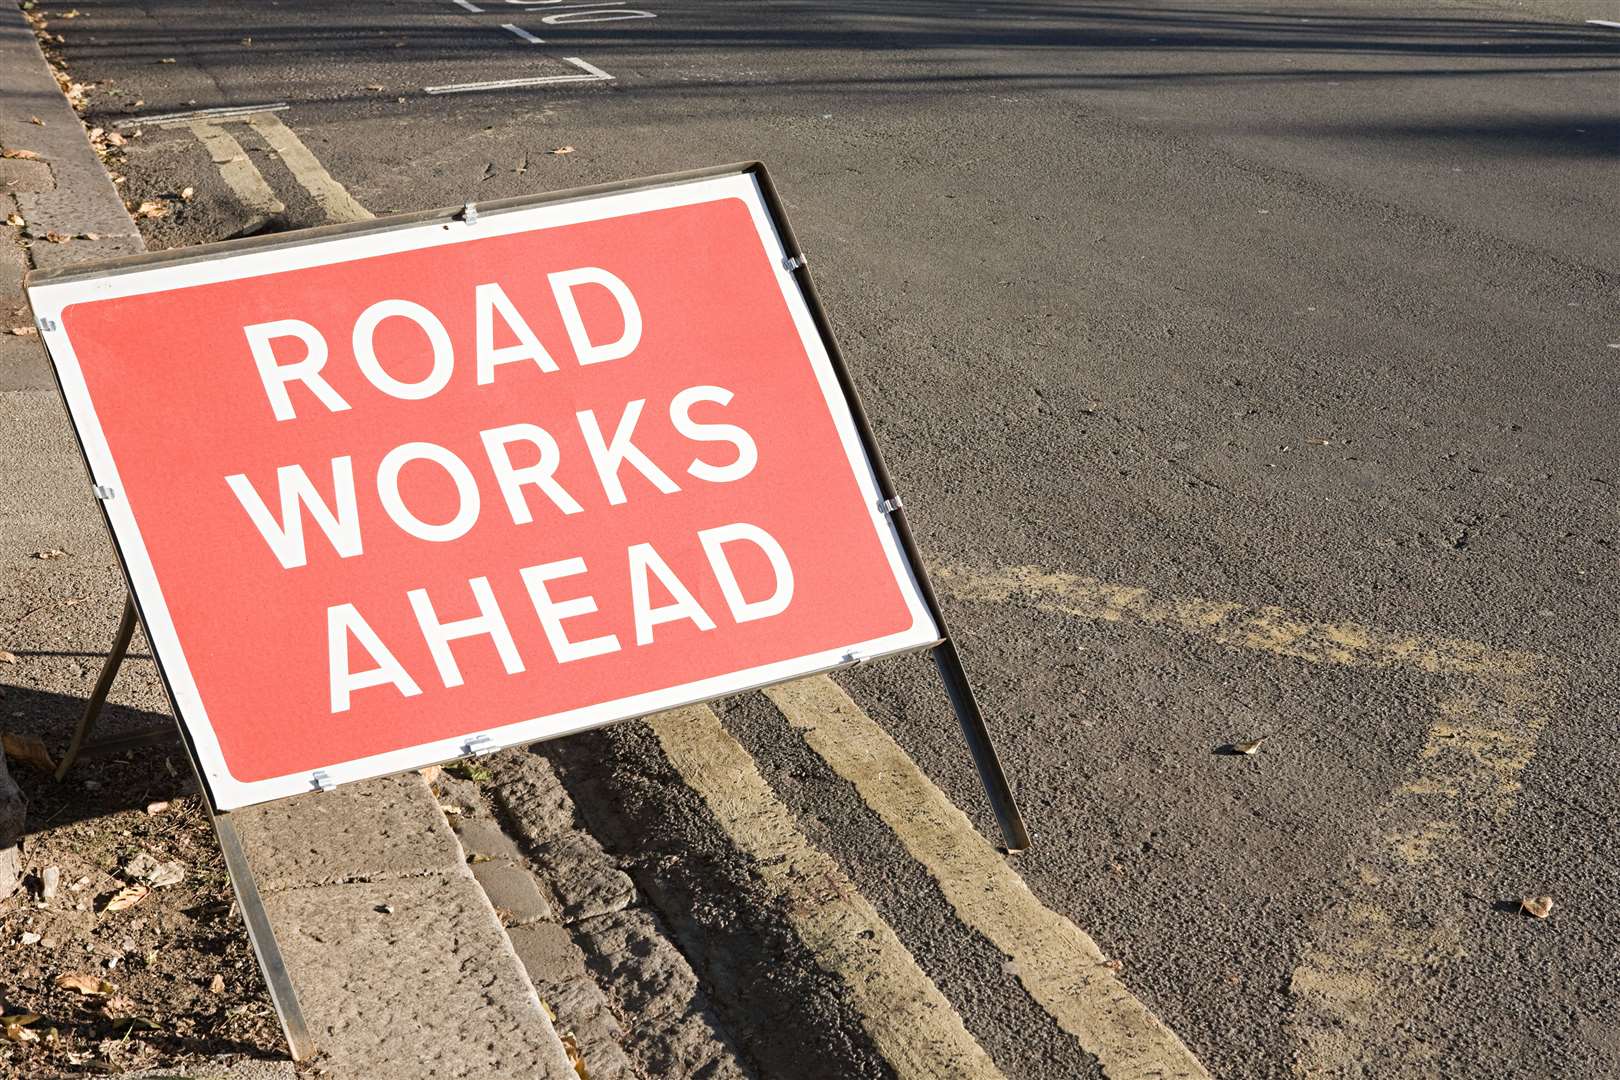 The roadworks will last for four weeks